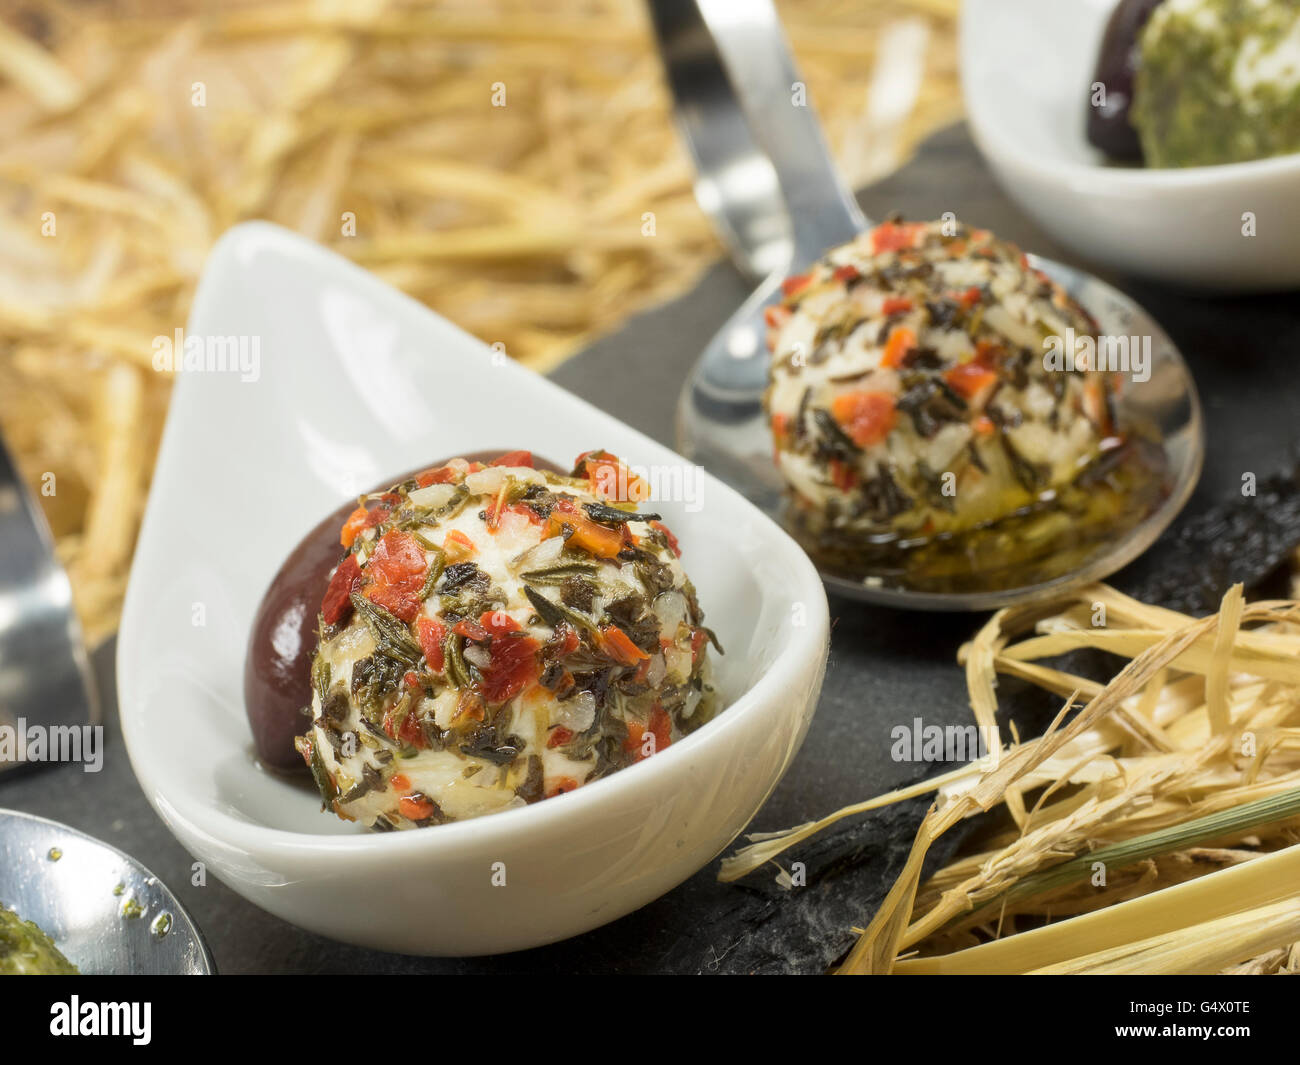 Cream cheese balls with herbs from goat's milk Stock Photo